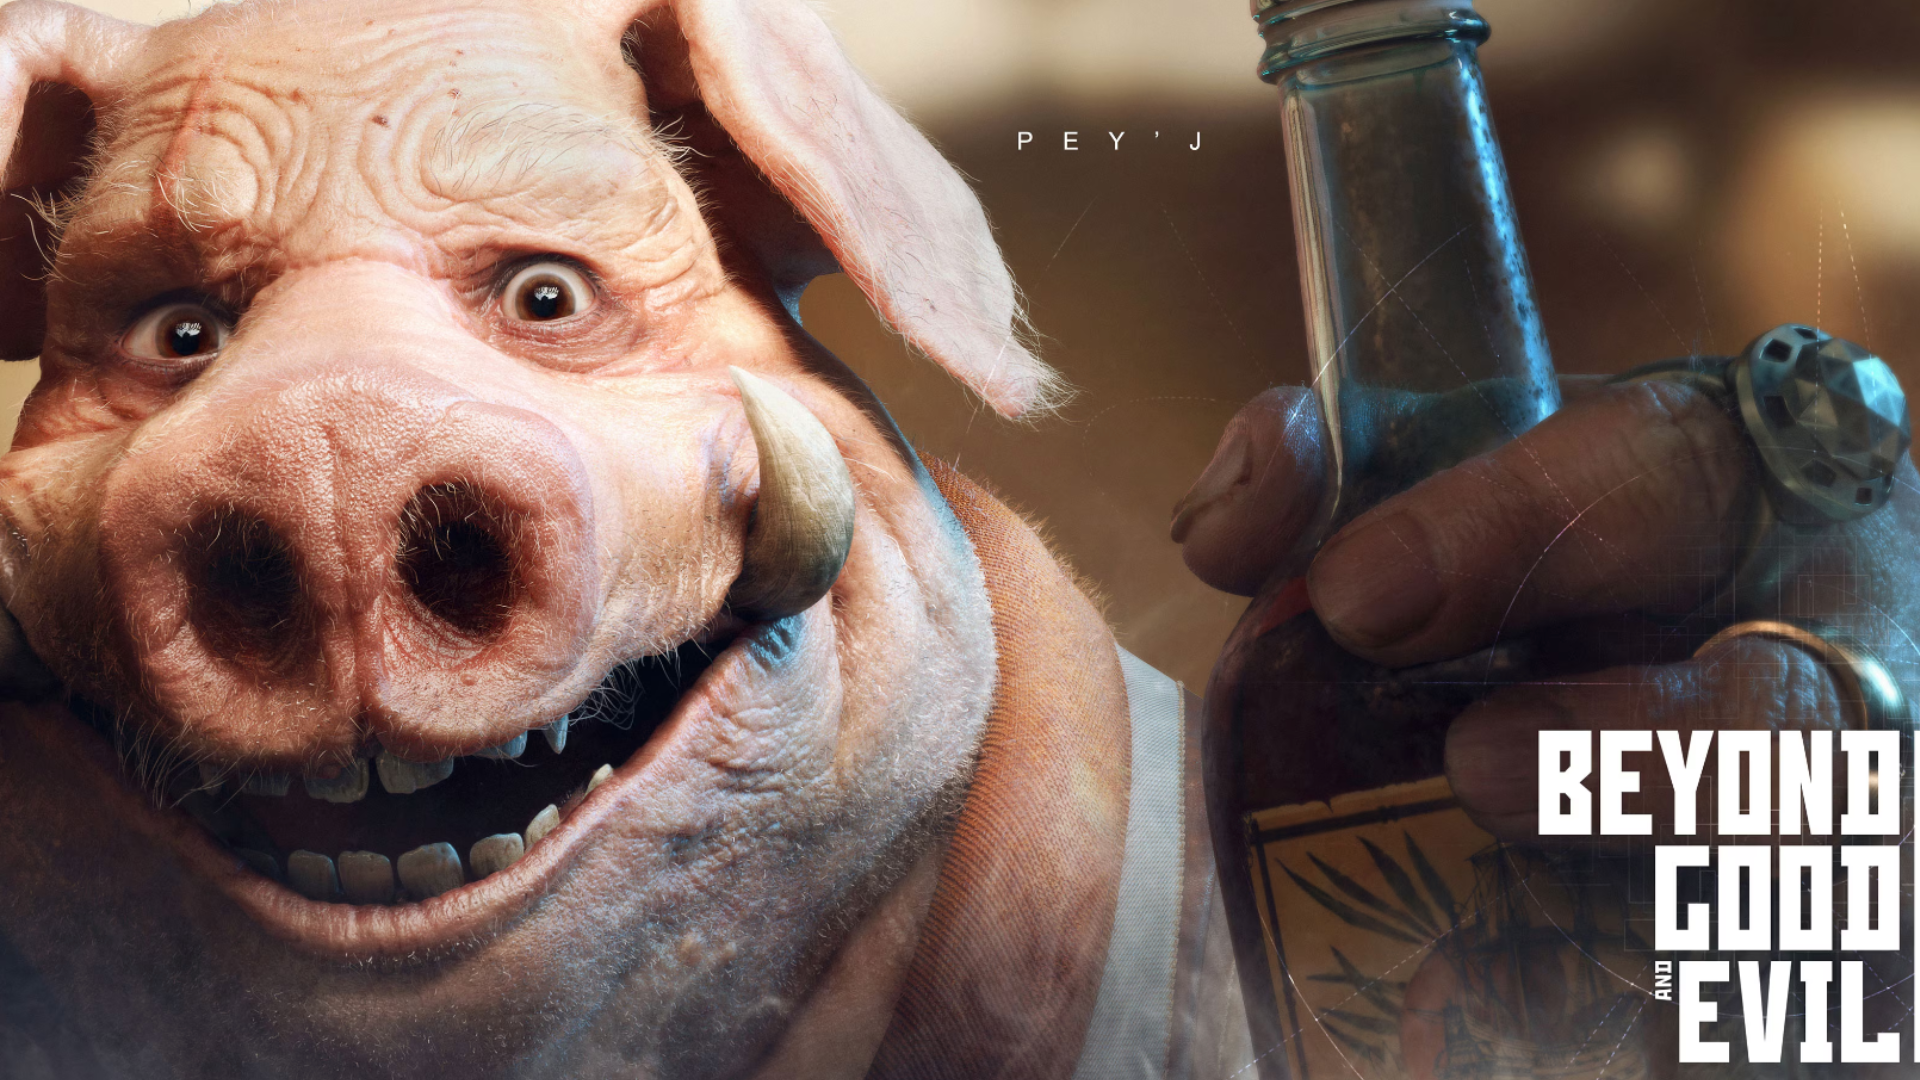 A close-up of Pey'j, the anthropomorphic pig character from "Beyond Good and Evil 2," holding a bottle and smiling warmly